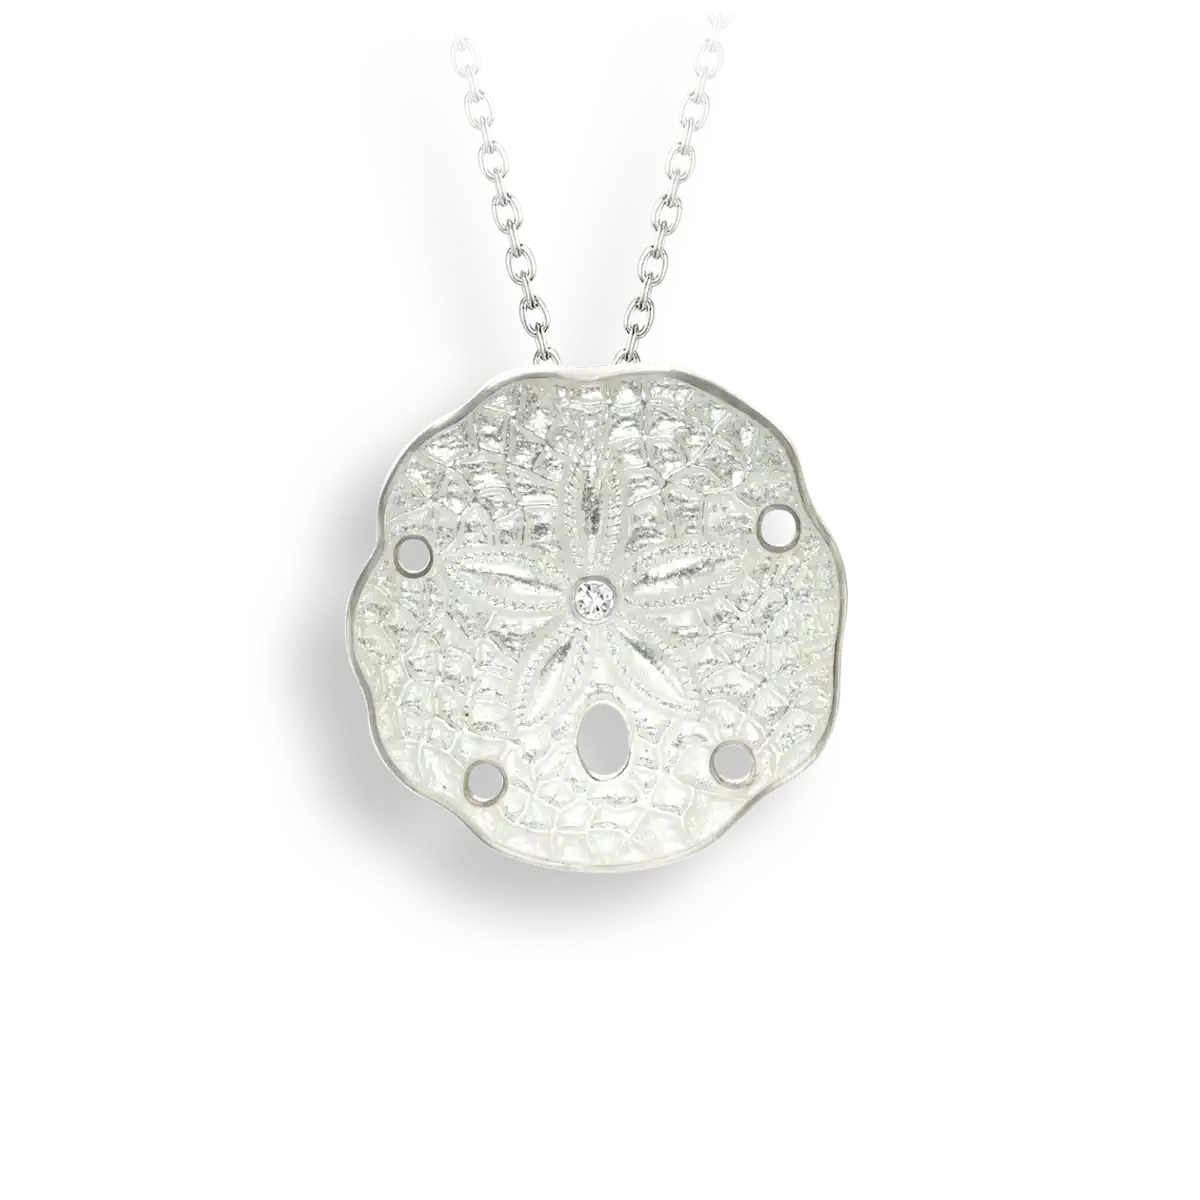 White Sand Dollar Necklace. Sterling Silver-White Sapphire